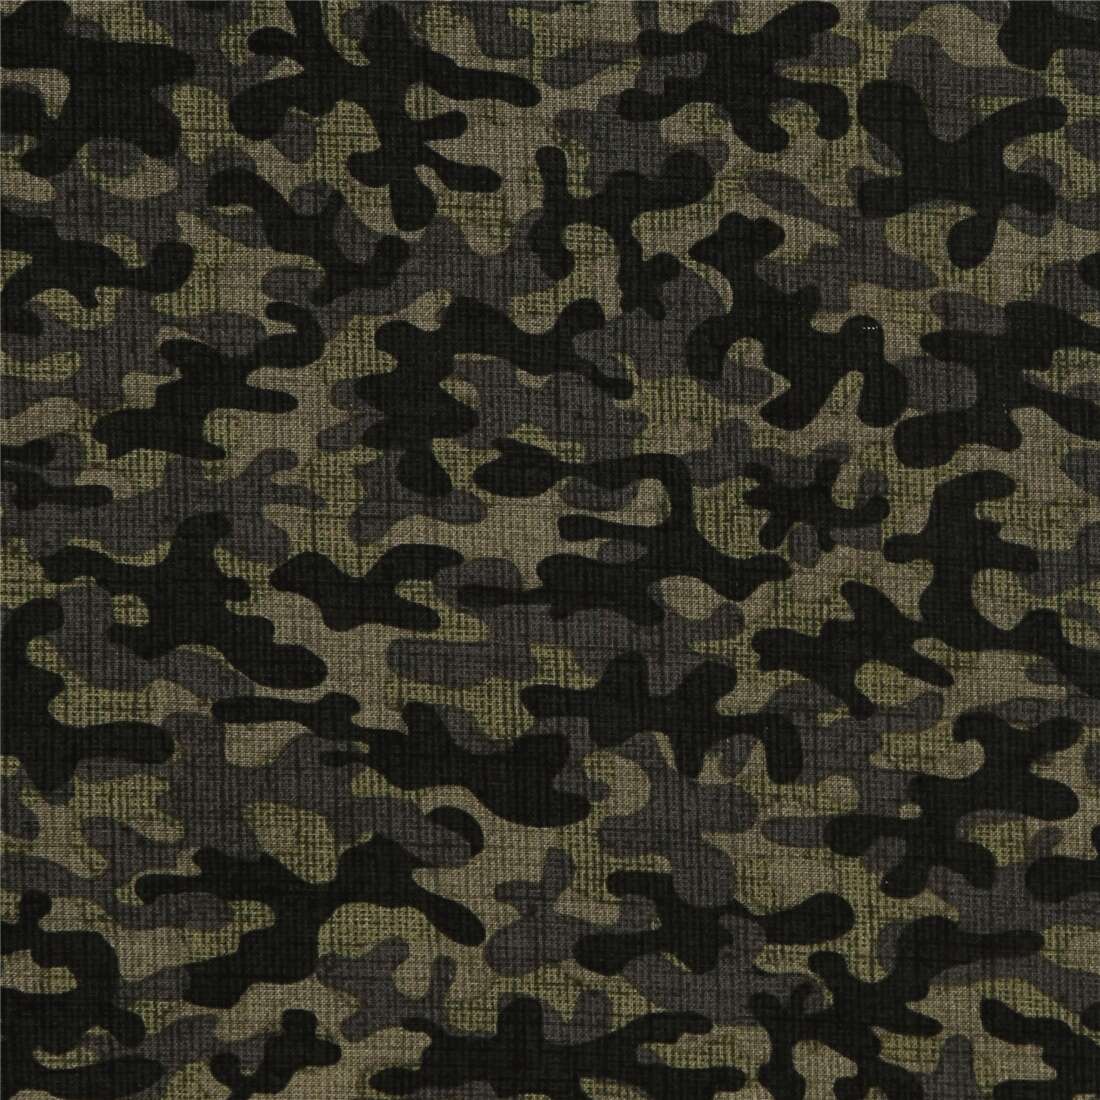 https://kawaii.kawaii.at/images/product_images/big_images/Timeless-Treasures-camouflage-spots-brown-olive-green-fabric-245164-5.jpg